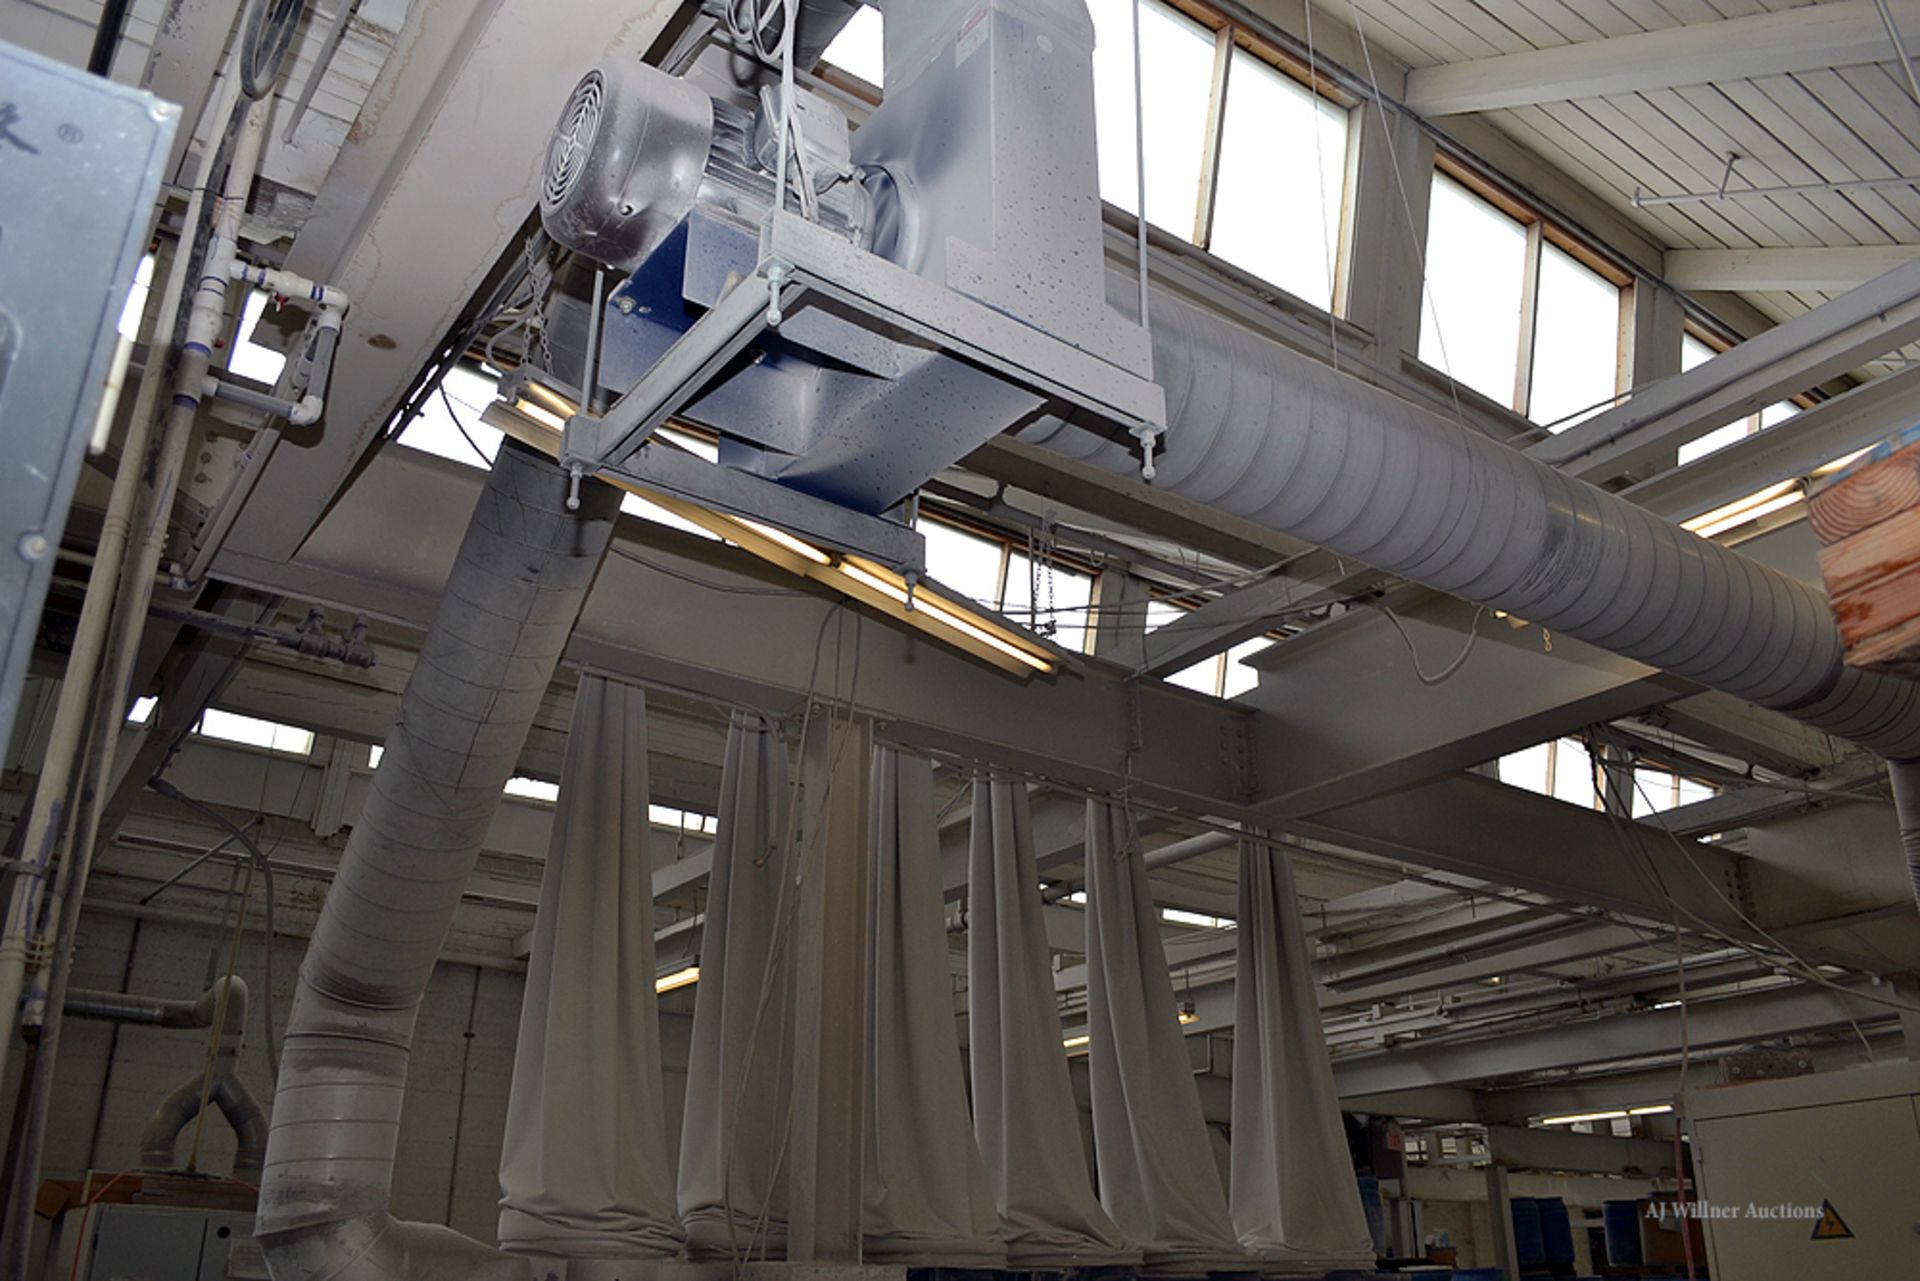 6-Bag Dust Collection System w/ Ceiling Mounted Motor & Duct Work - Image 3 of 5